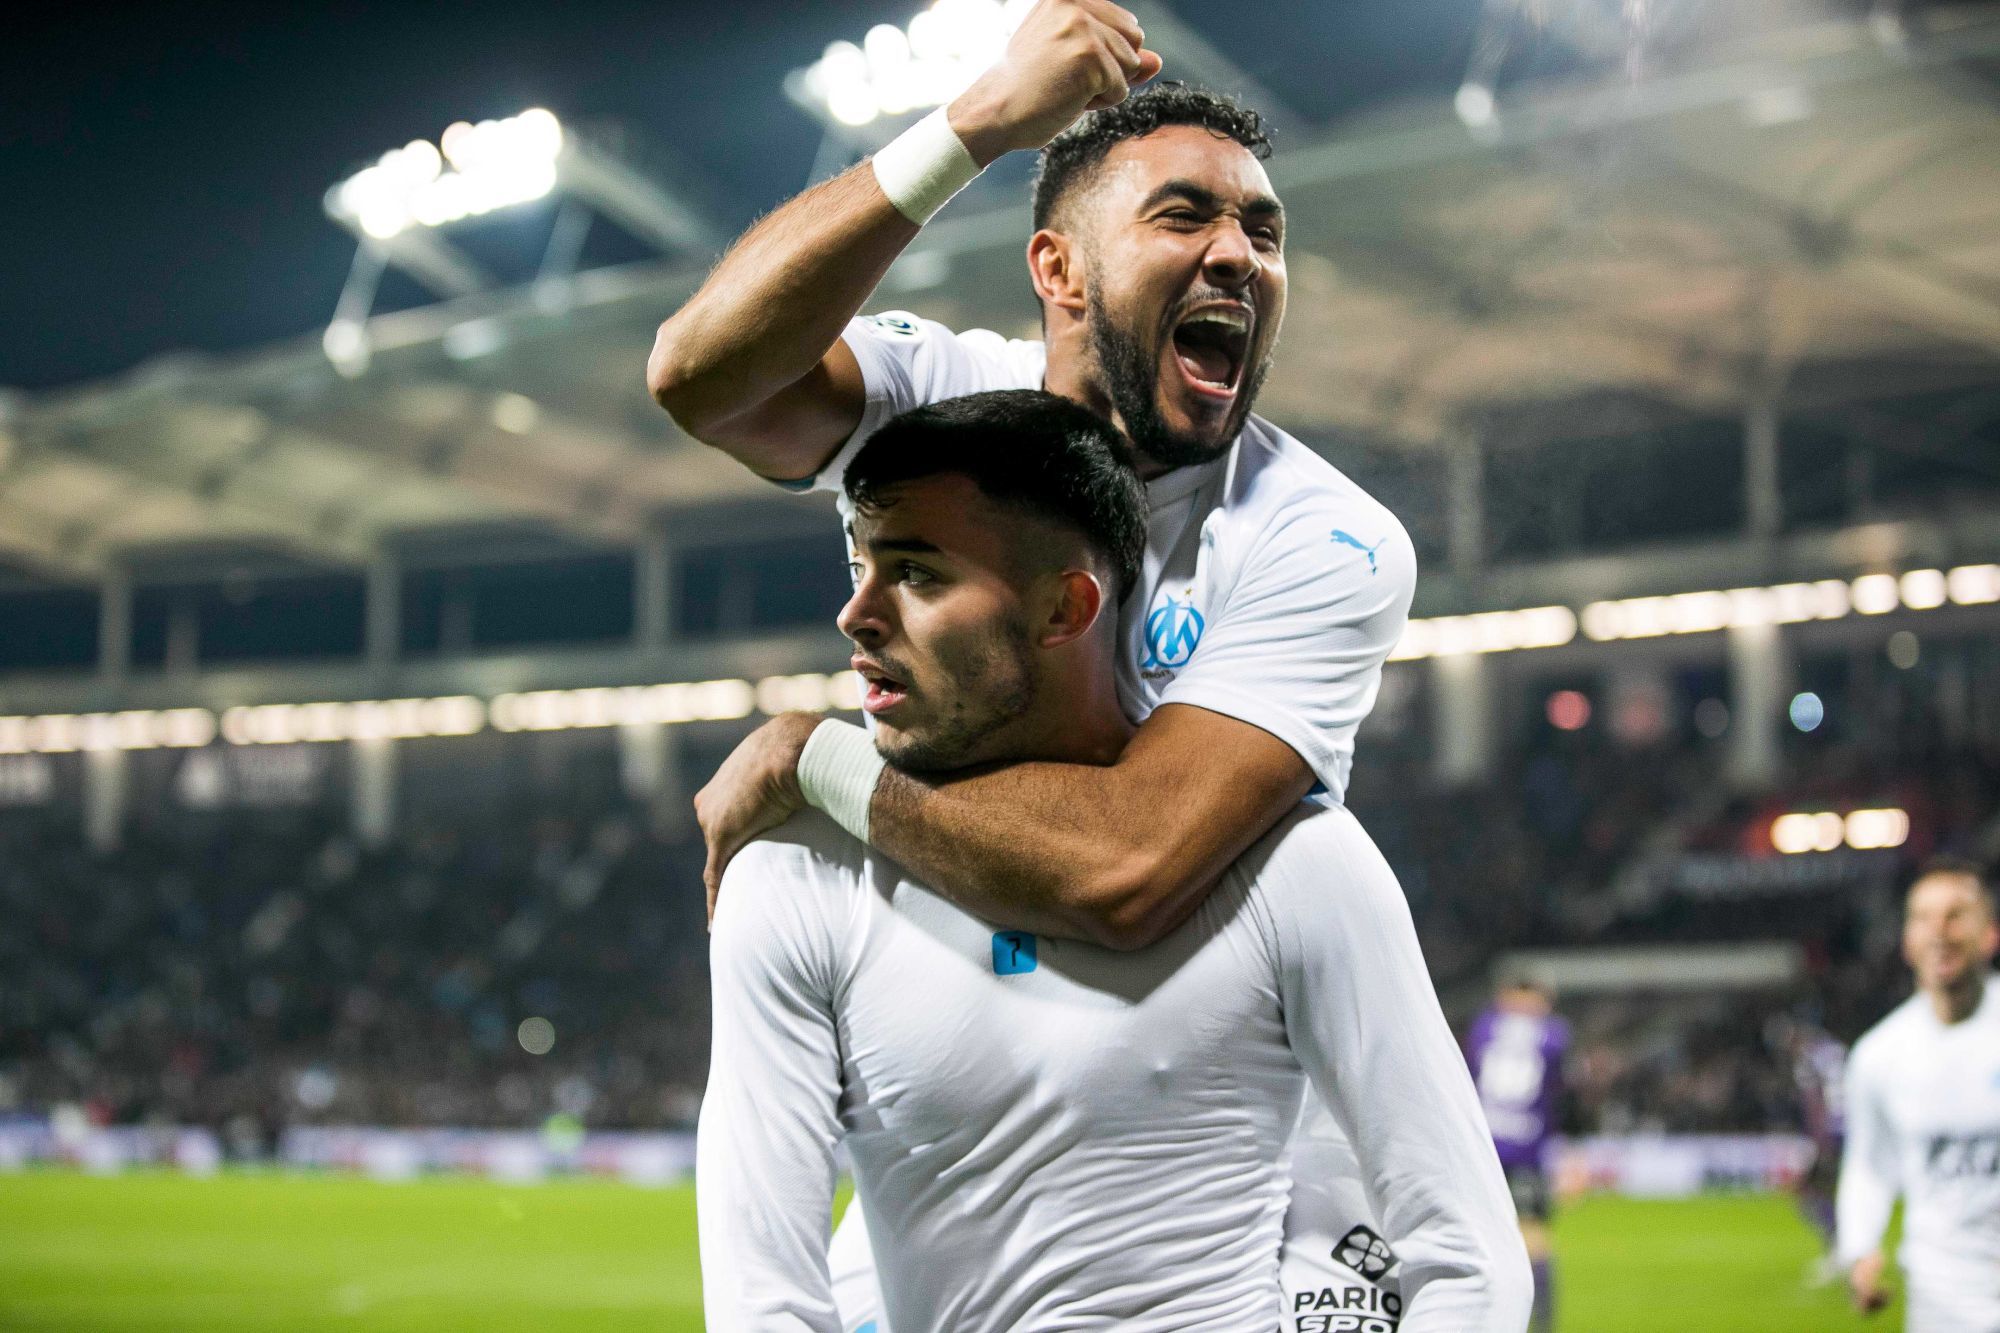 Dimitri PAYET and Nemanja RADONJIC of Marseille celebrate his goal during the Ligue 1 match between Toulouse and Marseille on November 24, 2019 in Toulouse, France. (Photo by JF Sanchez/Icon Sport) - Dimitri PAYET - Nemanja RADONJIC - Stadium Municipal - Toulouse (France)